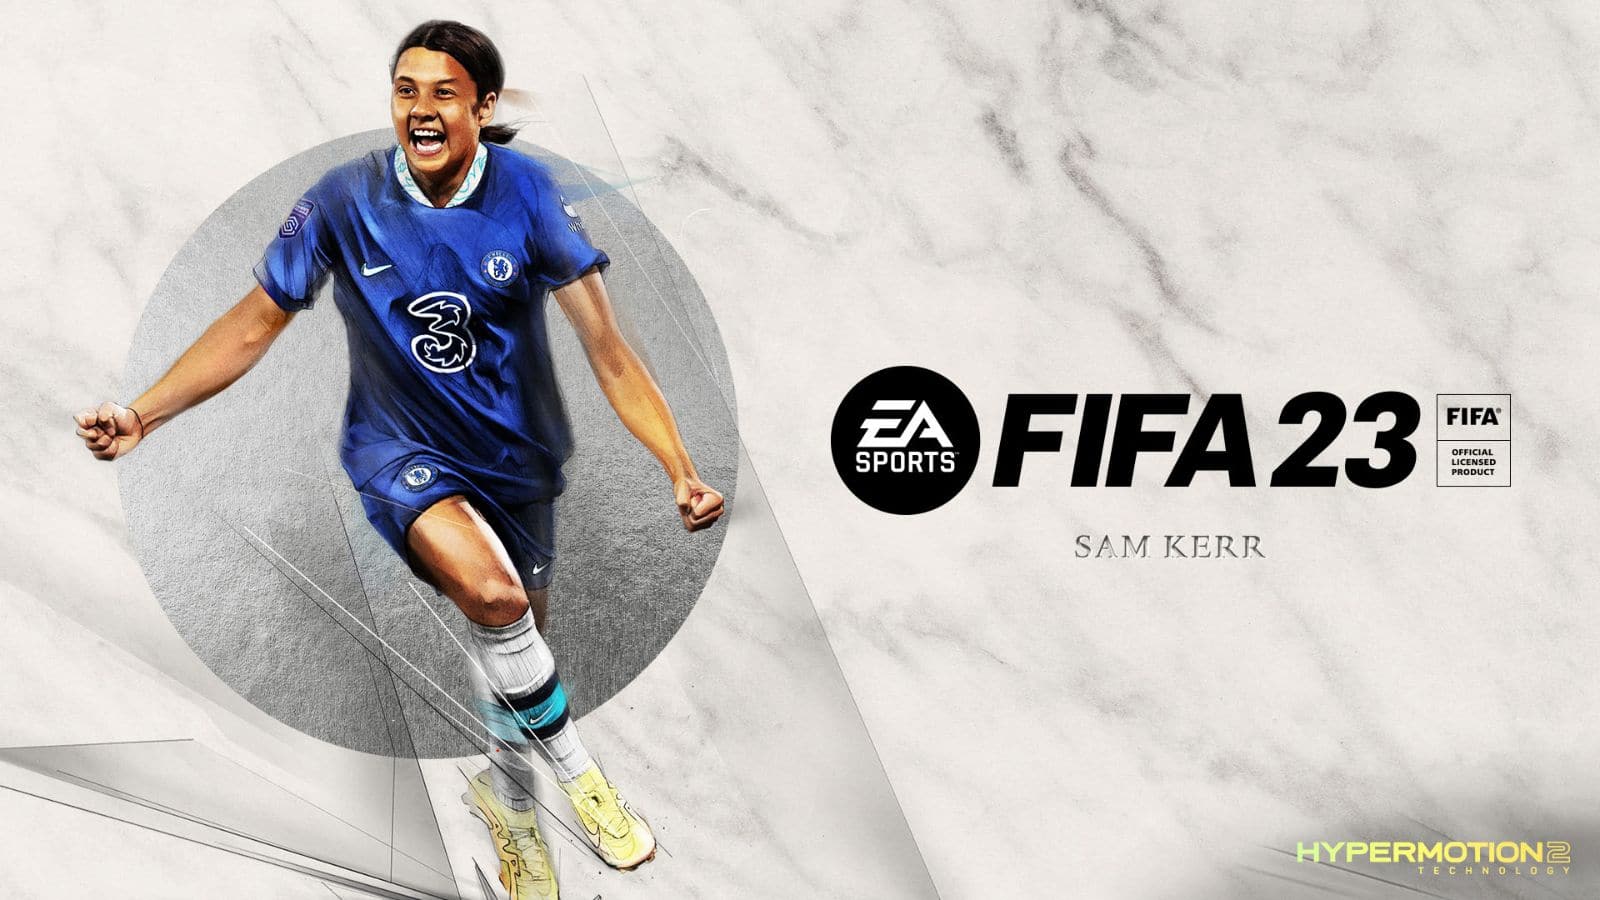 FIFA 23 release date, early access, price, soundtrack, ratings and